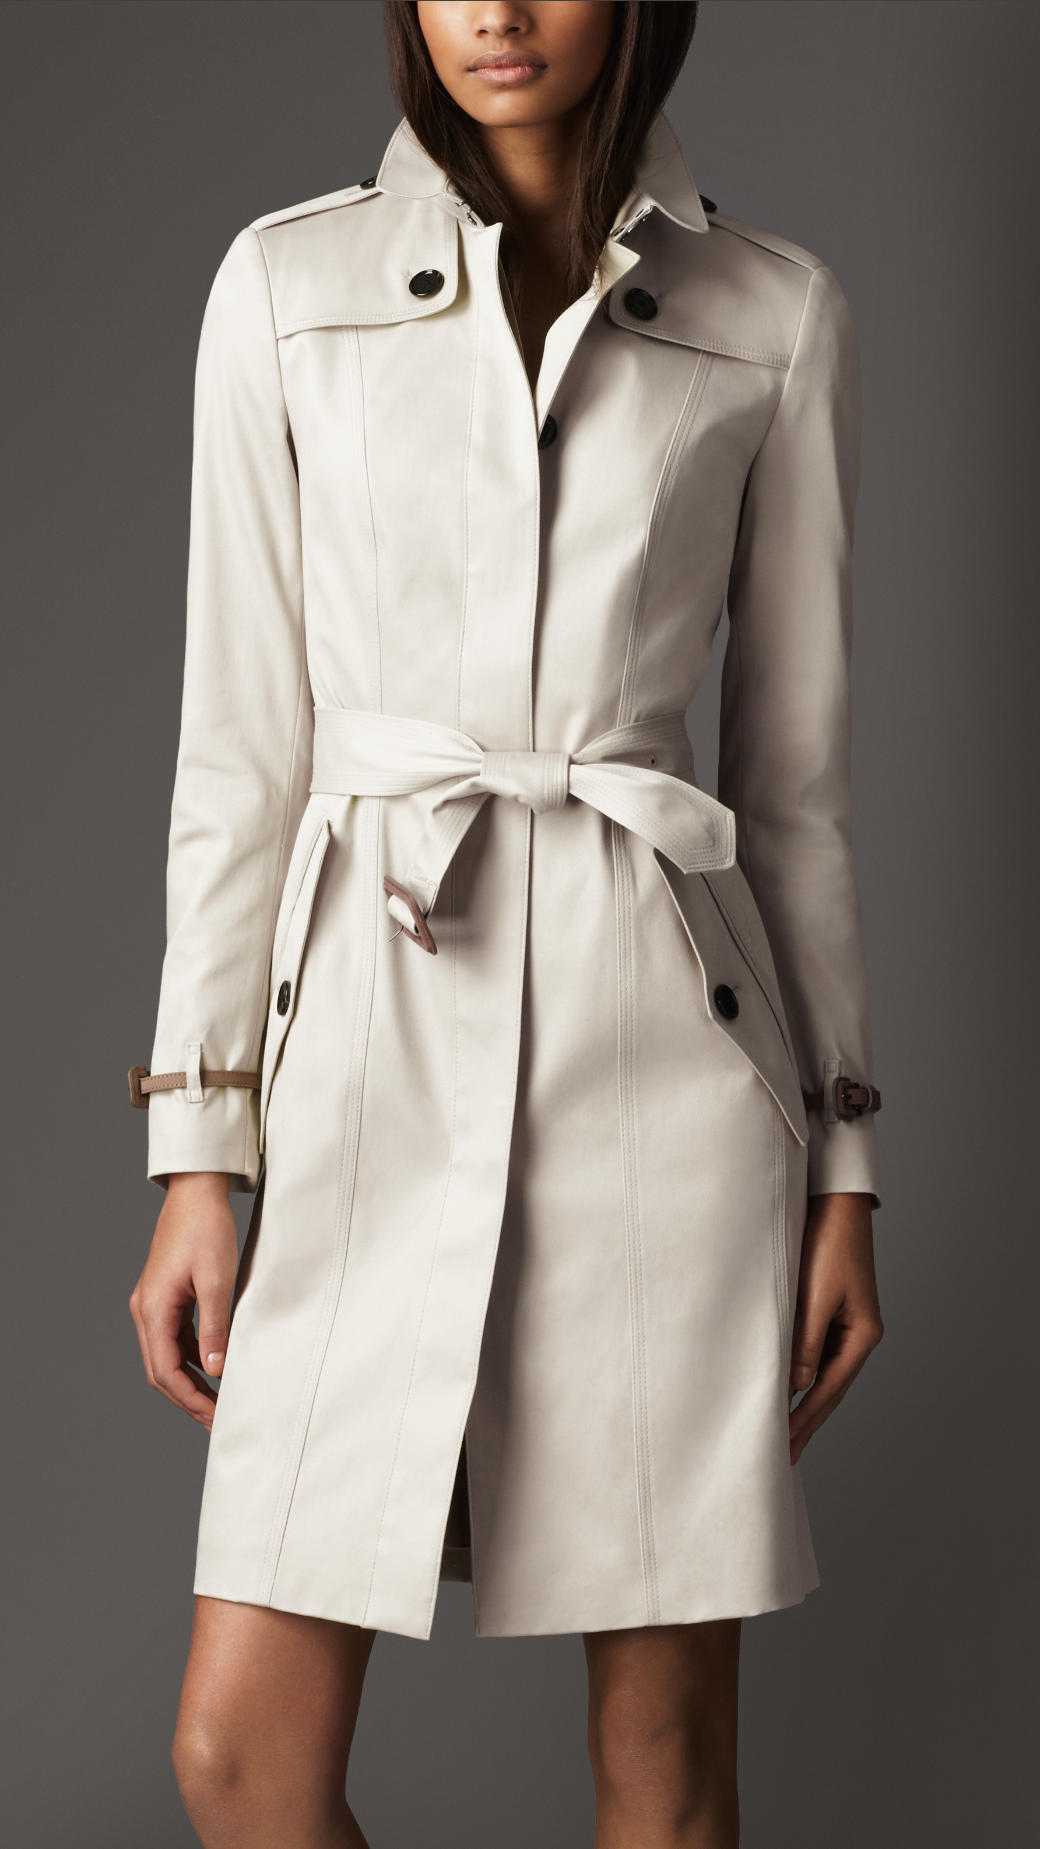 Lyst - Burberry Long Cotton Twill Nubuck Leather Detail Trench Coat in ...